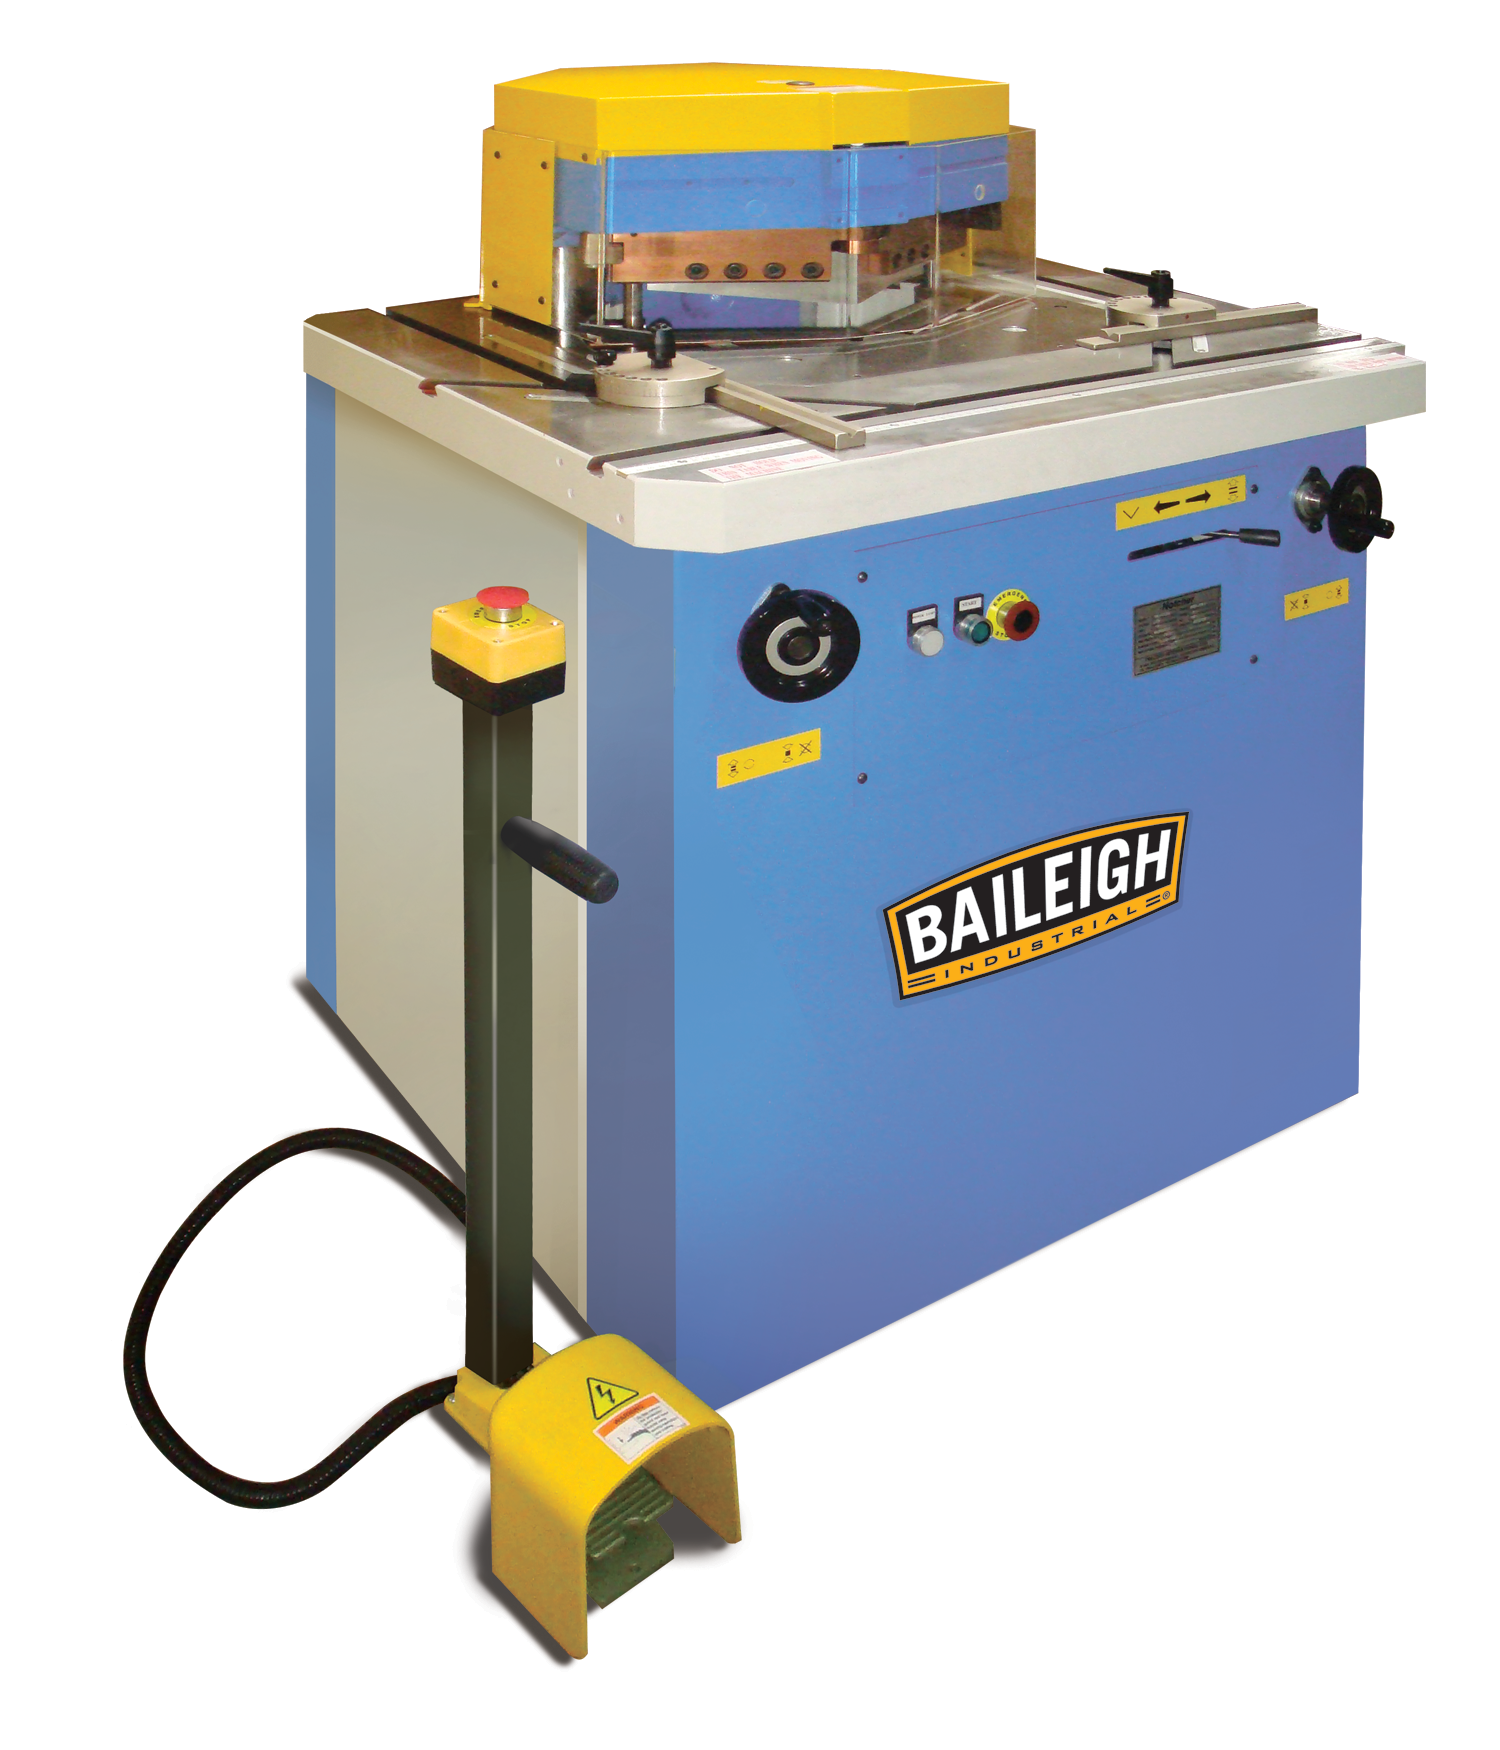 Baileigh SN-V04-MS 220V 60 Hz 3 Phase 4 Gauge (6mm) Hydraulic Variable Angle Sheet Metal Notcher